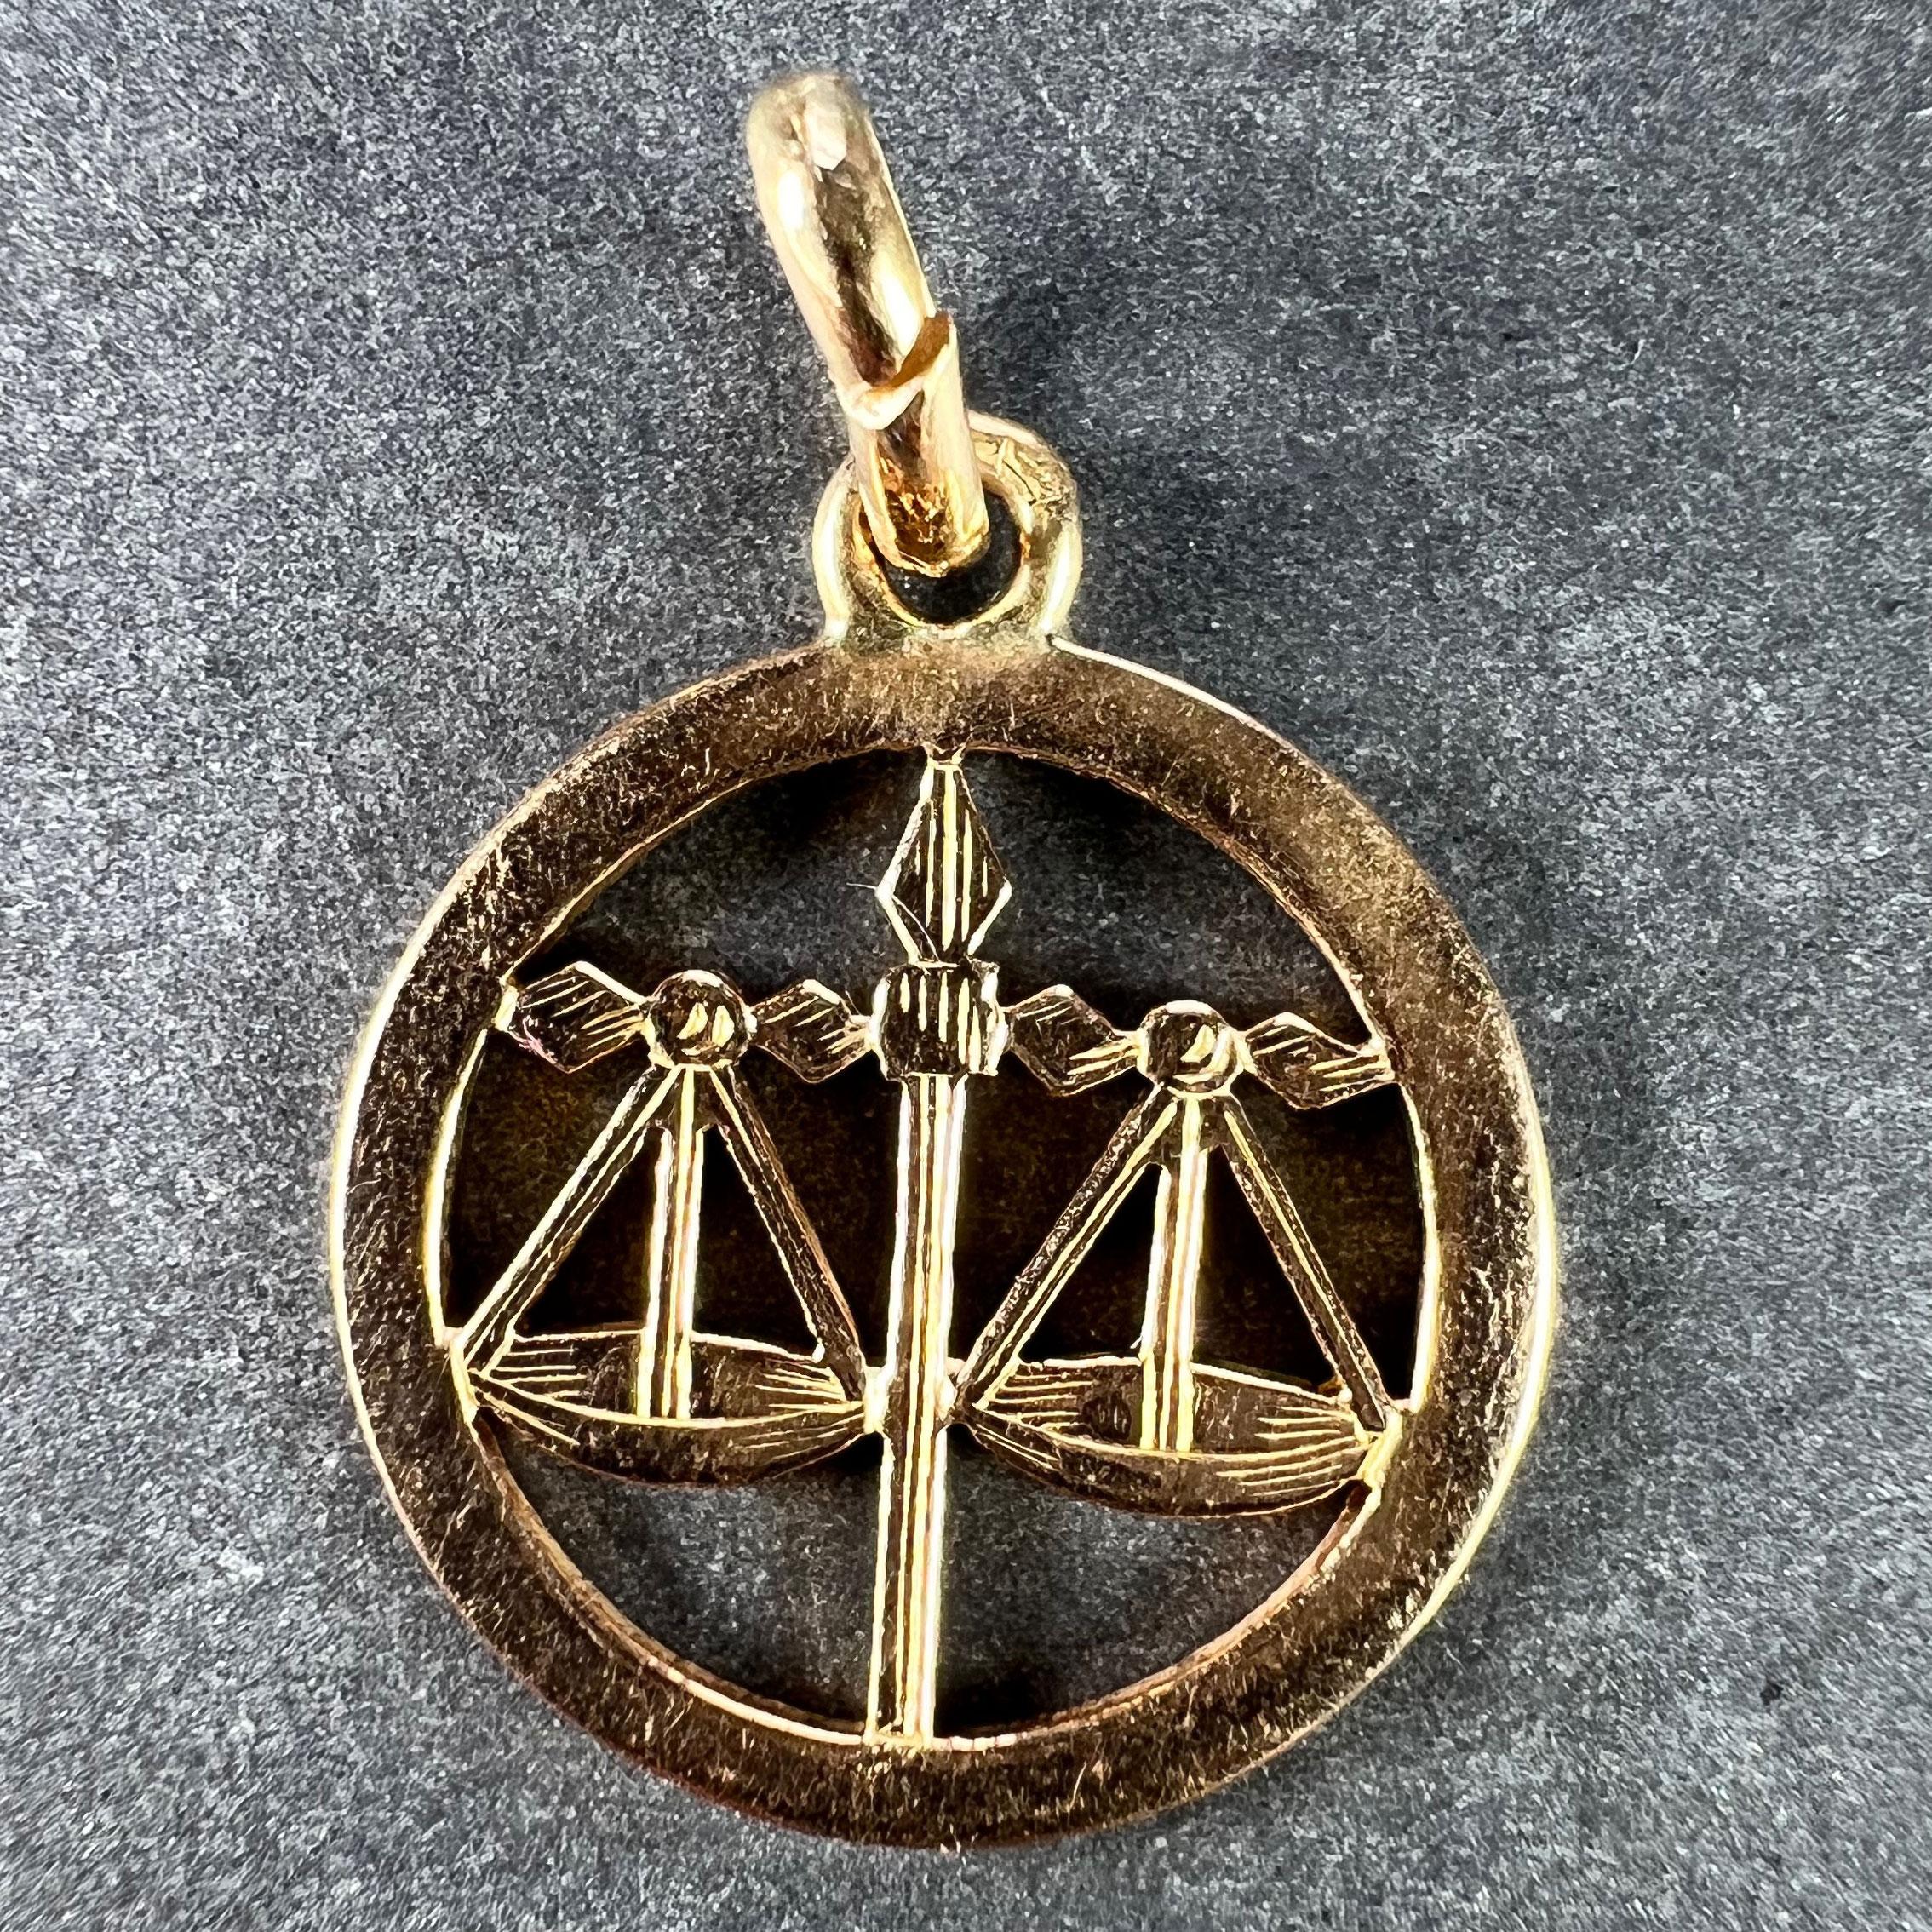 A French 18 karat (18K) yellow gold charm pendant designed as a circular disc with cut-out areas depicting a set of balance scales representing the zodiac star sign of Libra. Stamped with the eagle’s head for French manufacture and 18 karat